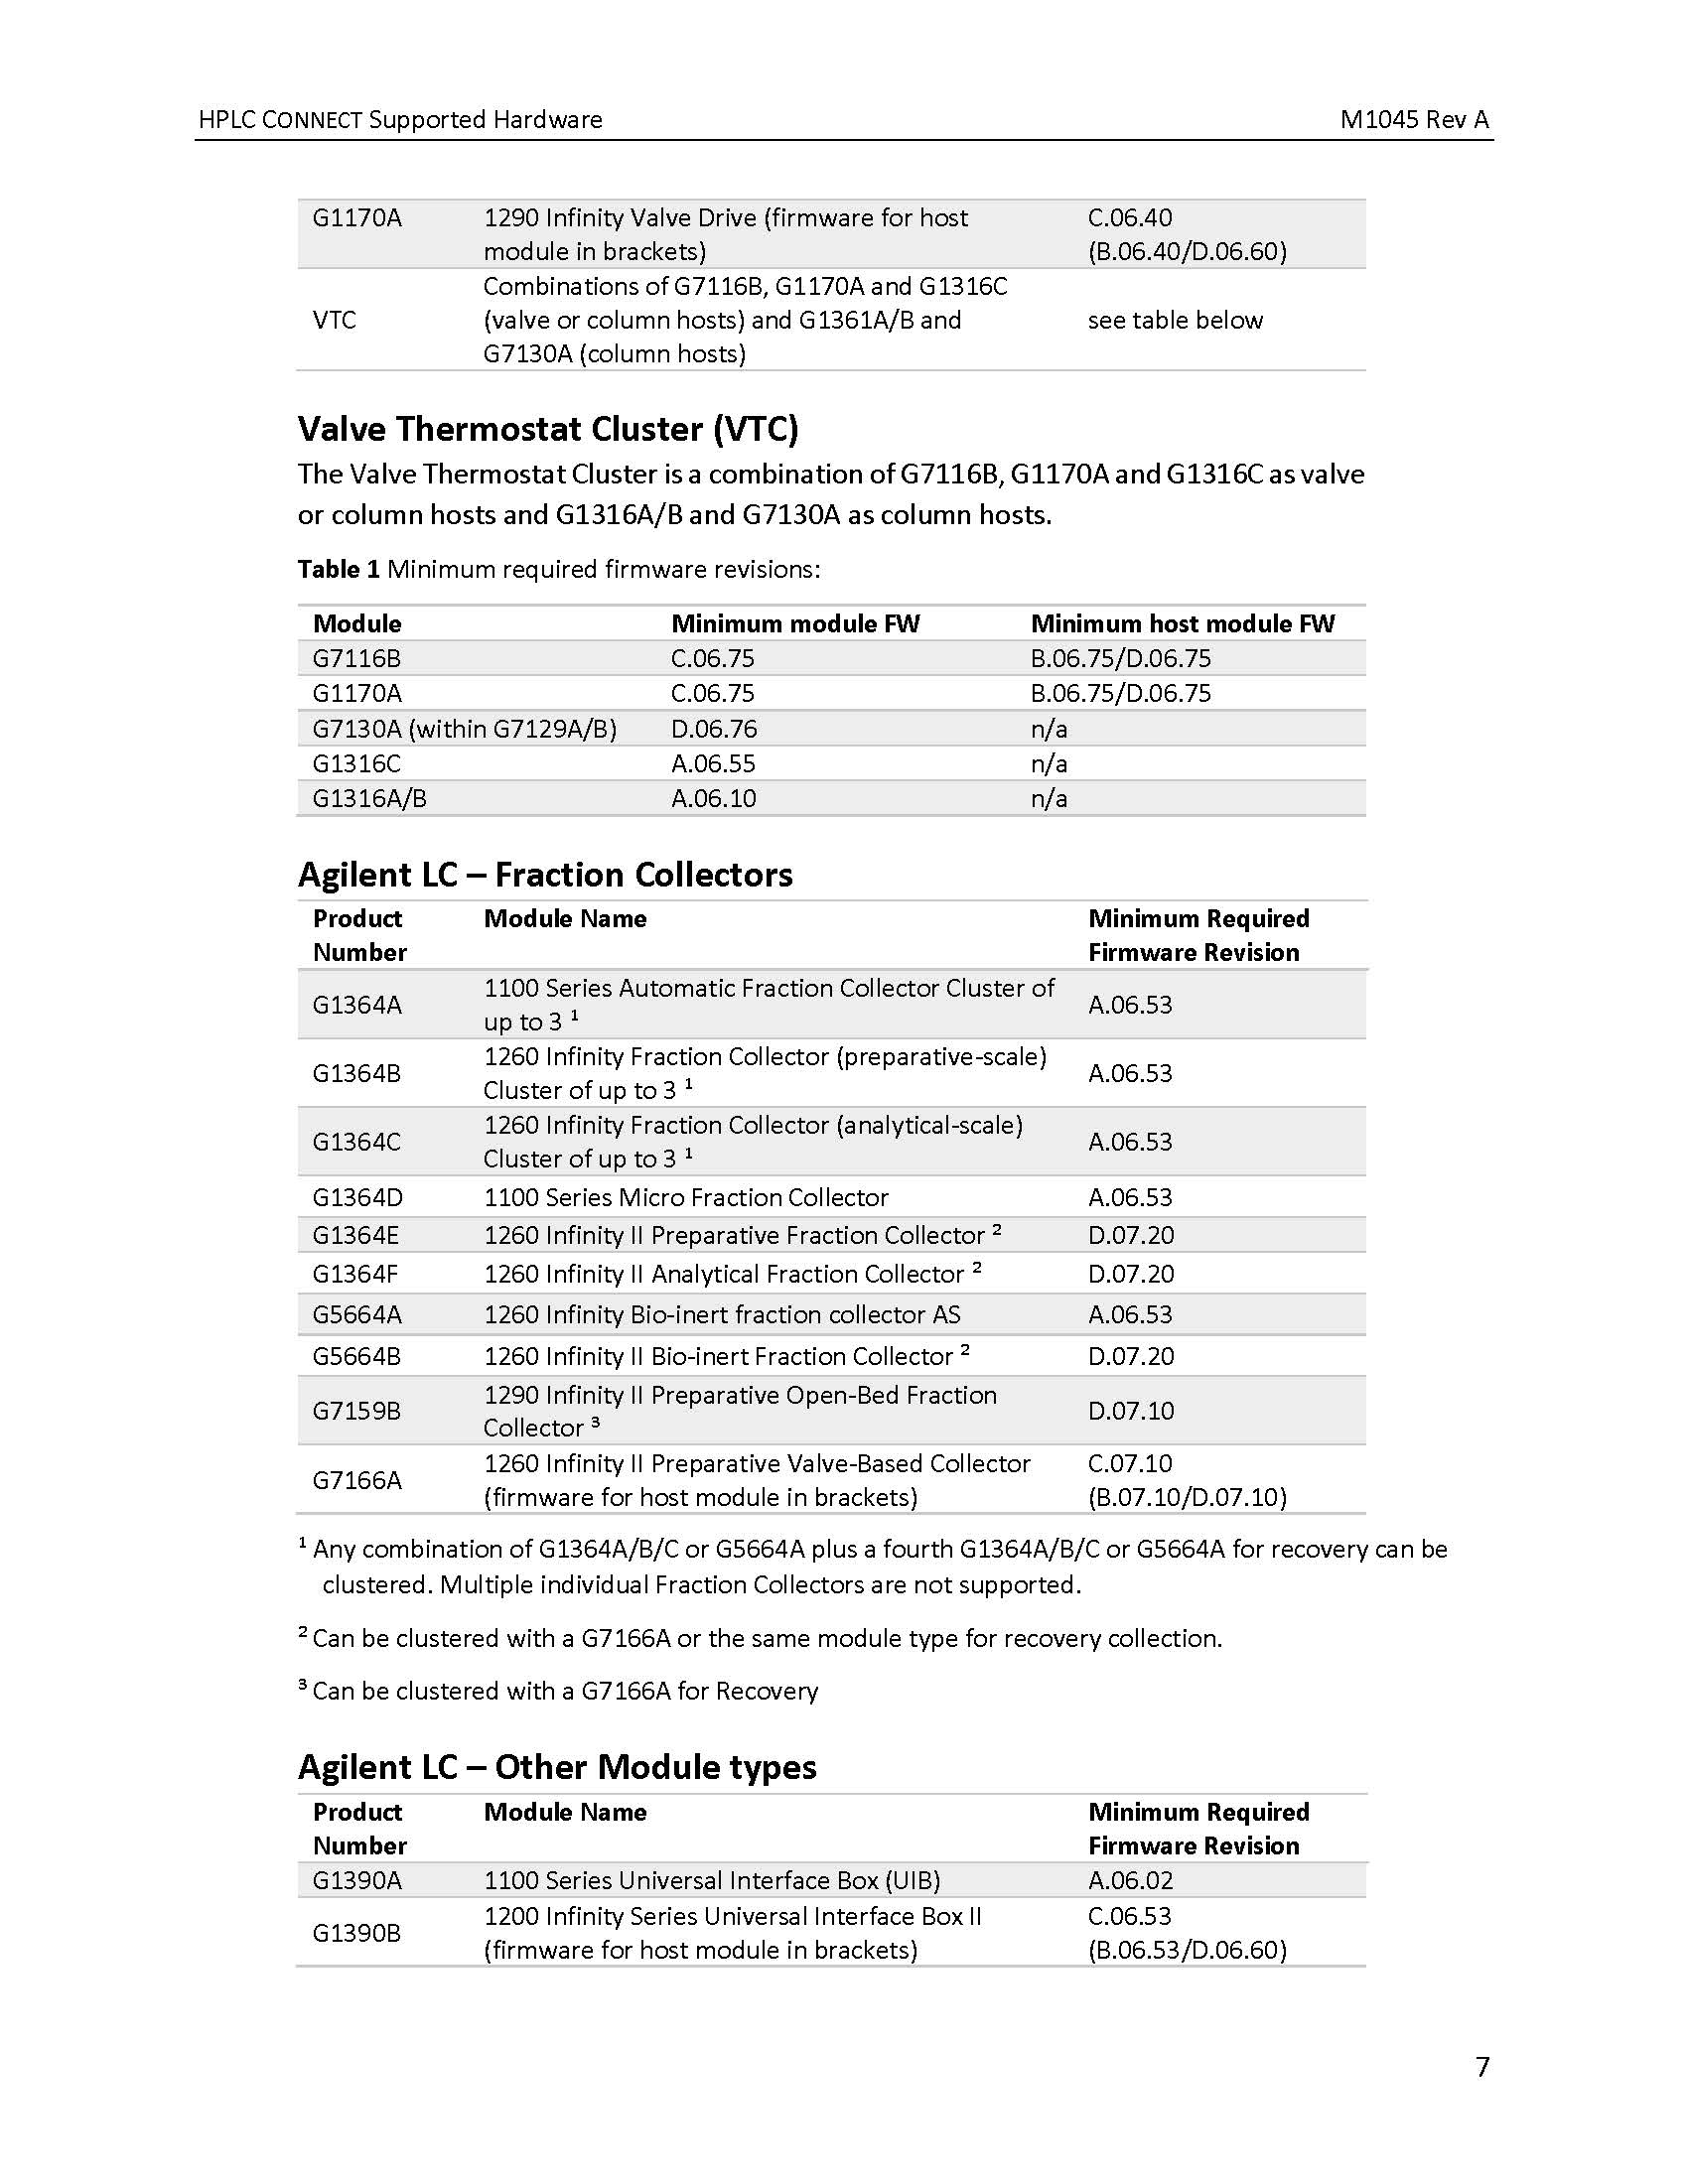 ReadMe-HPLC-CONNECT-Supported-Hardware-(M1045A)_Page_7